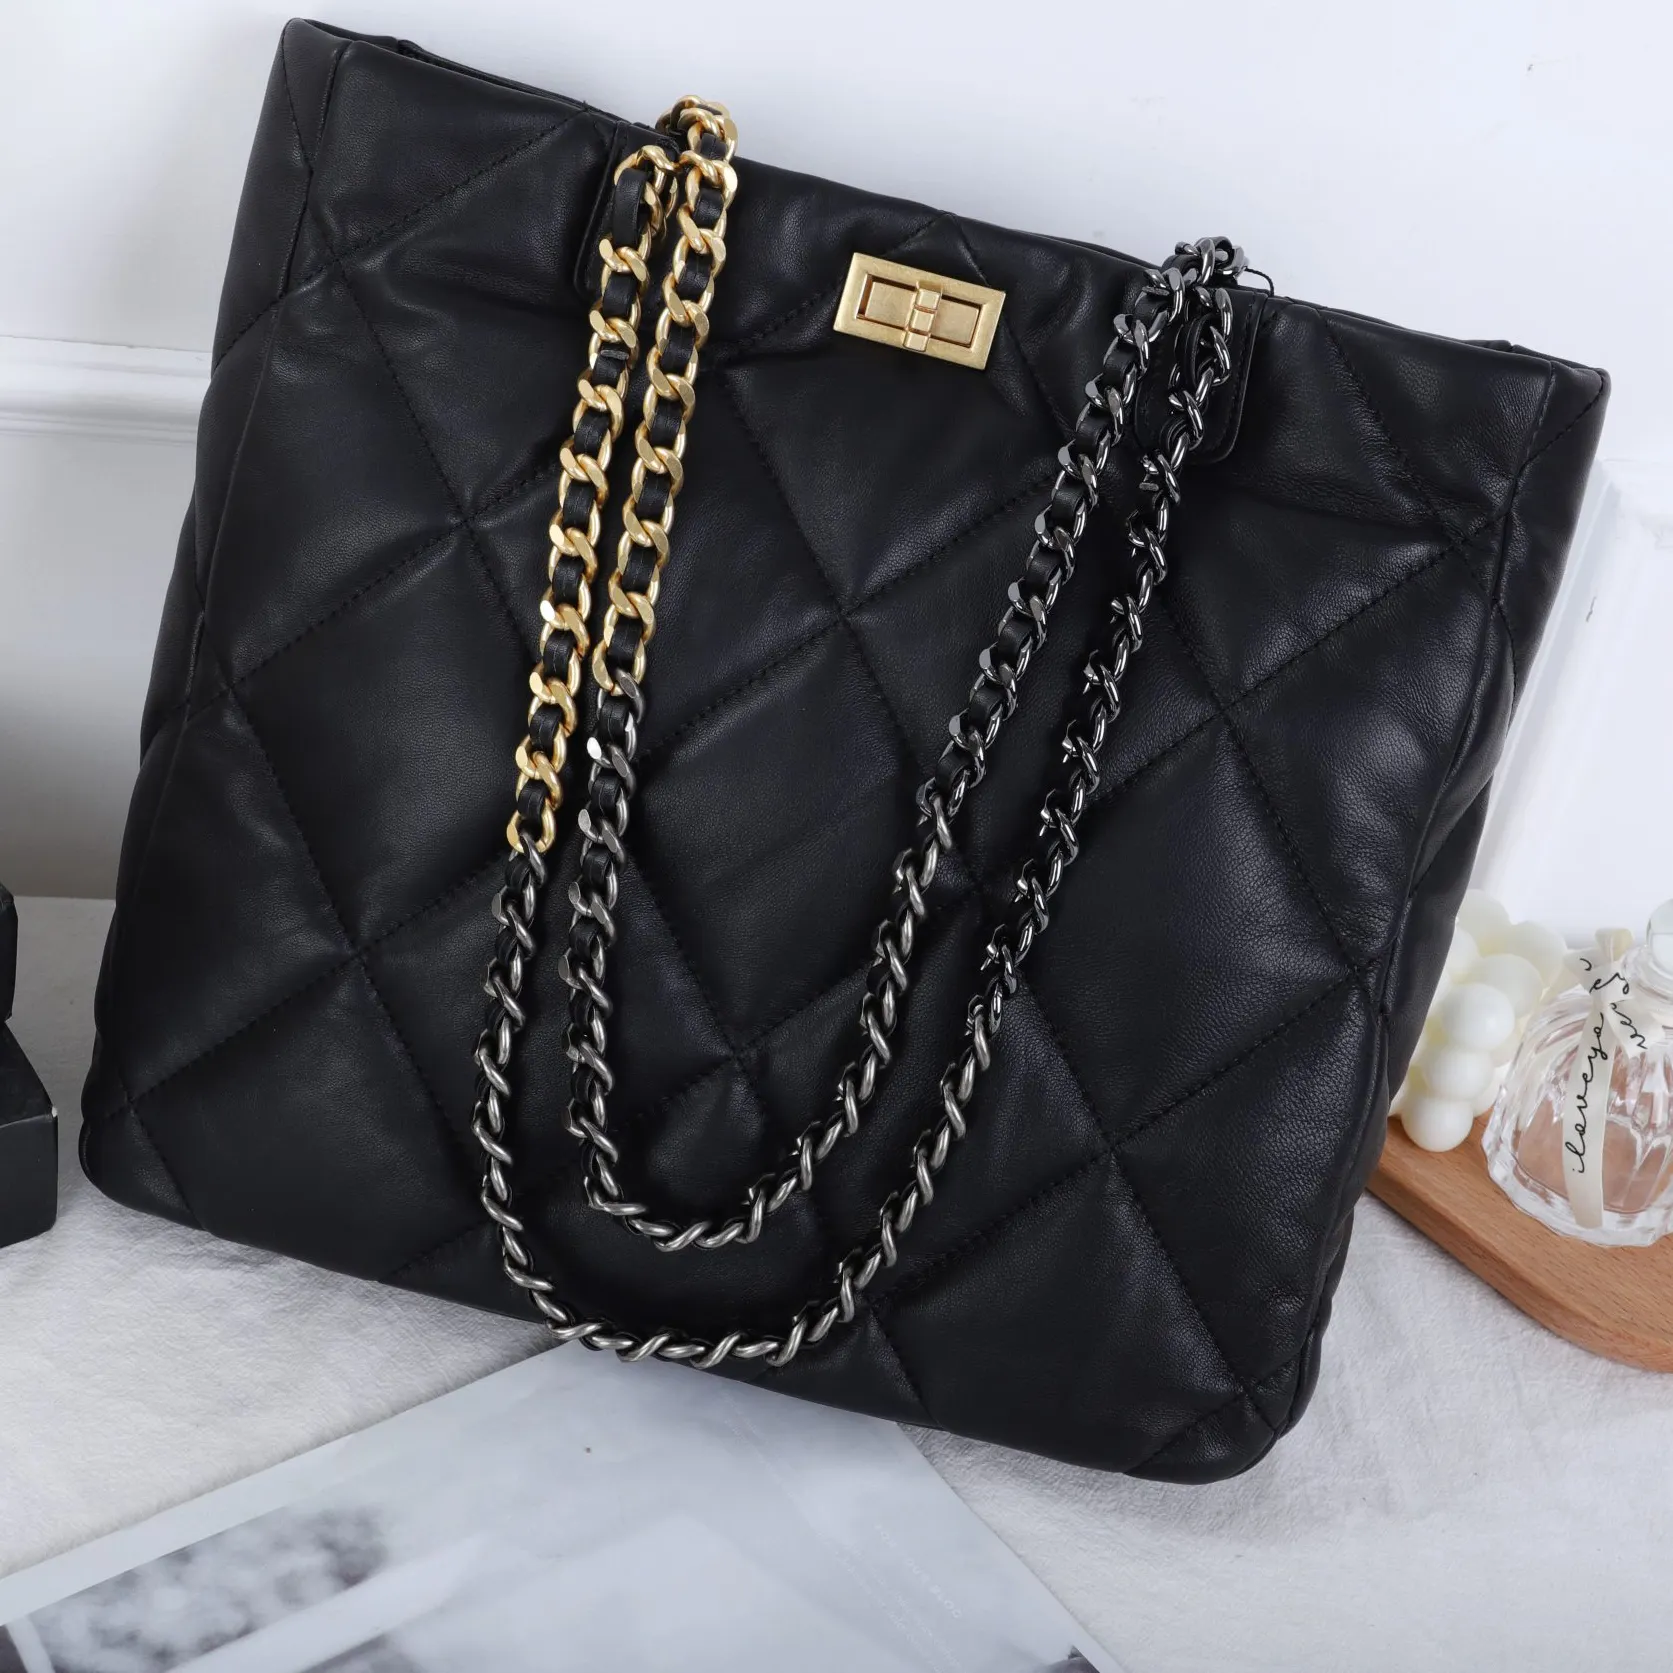 New fashionable designed Elegant and delicately wholesale factory luxury ladies bags leather handbags for women